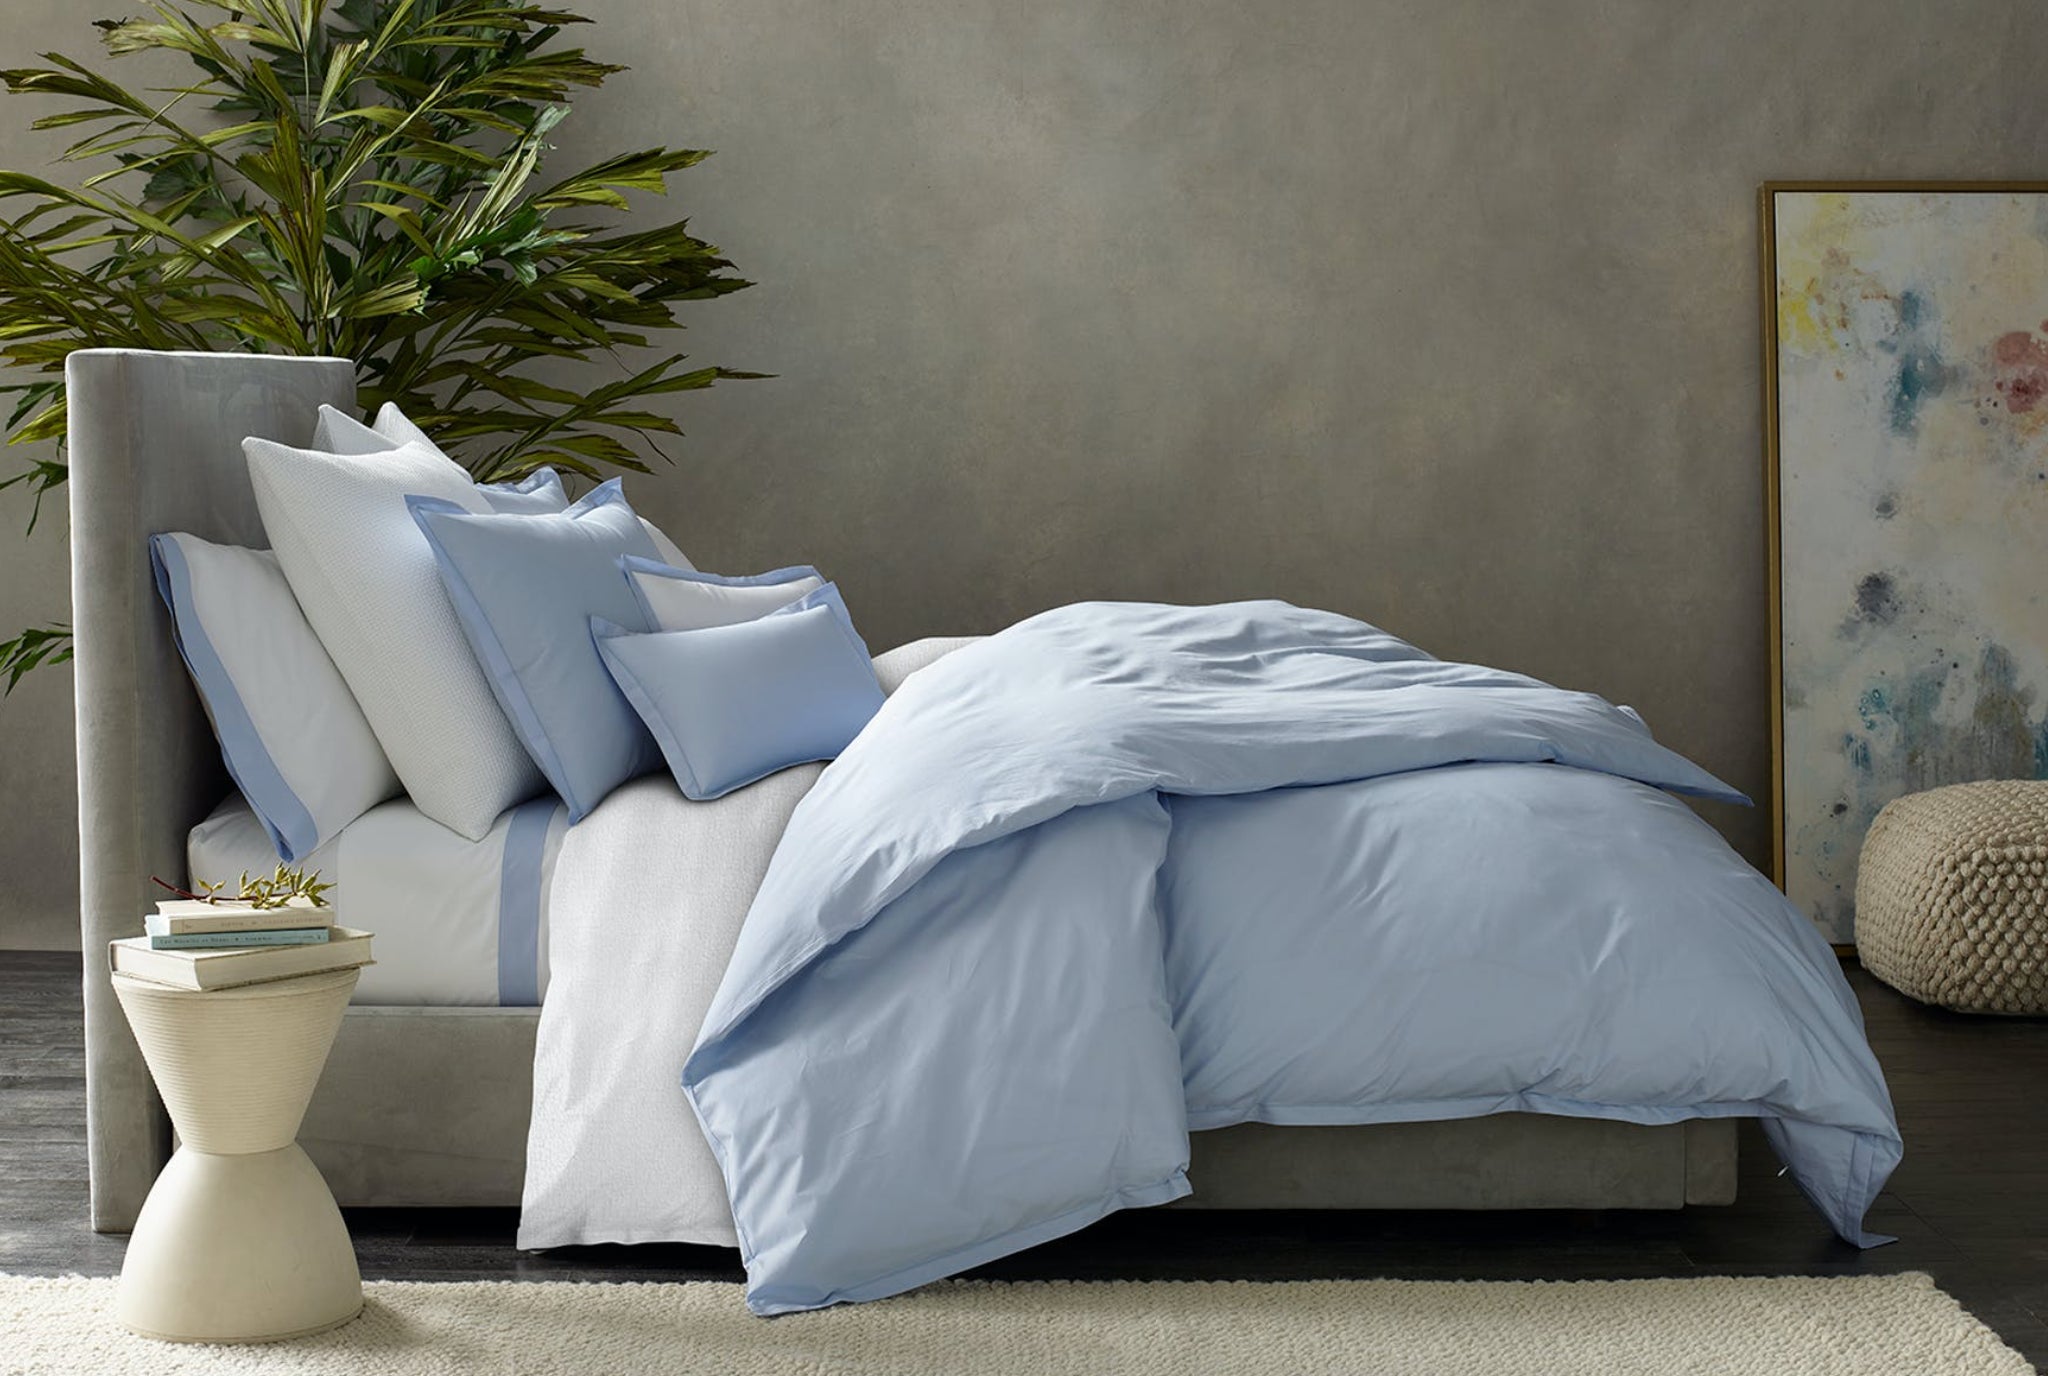 What are Egyptian Cotton Sheets?